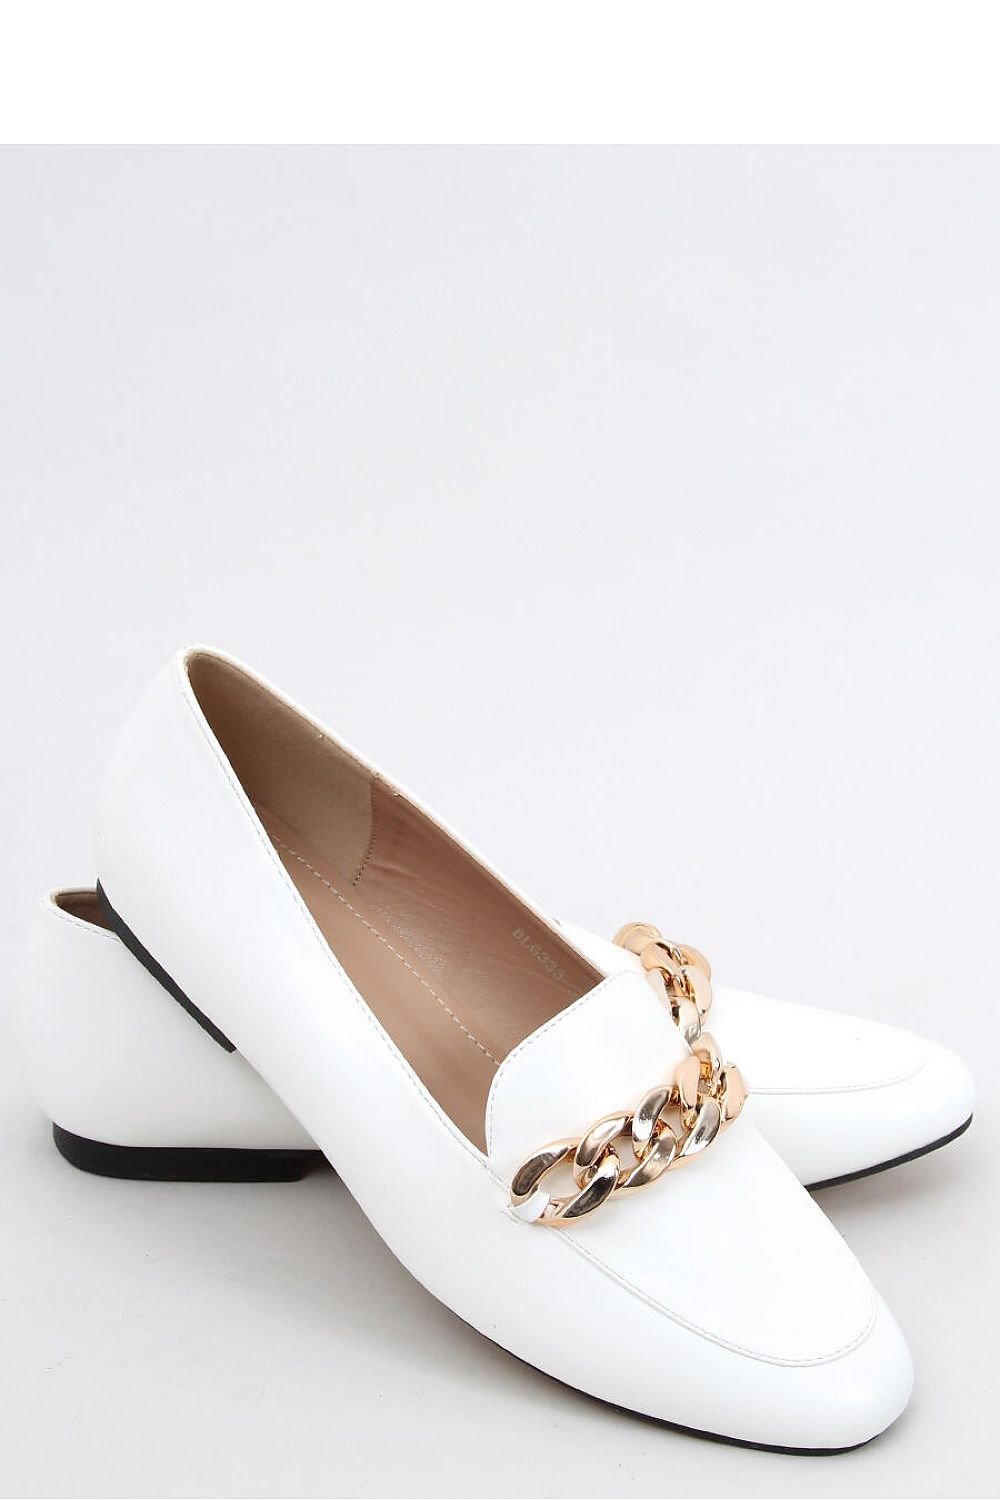 White Loafers With Rhinestone Gold Chain Lick Moccasins For Women